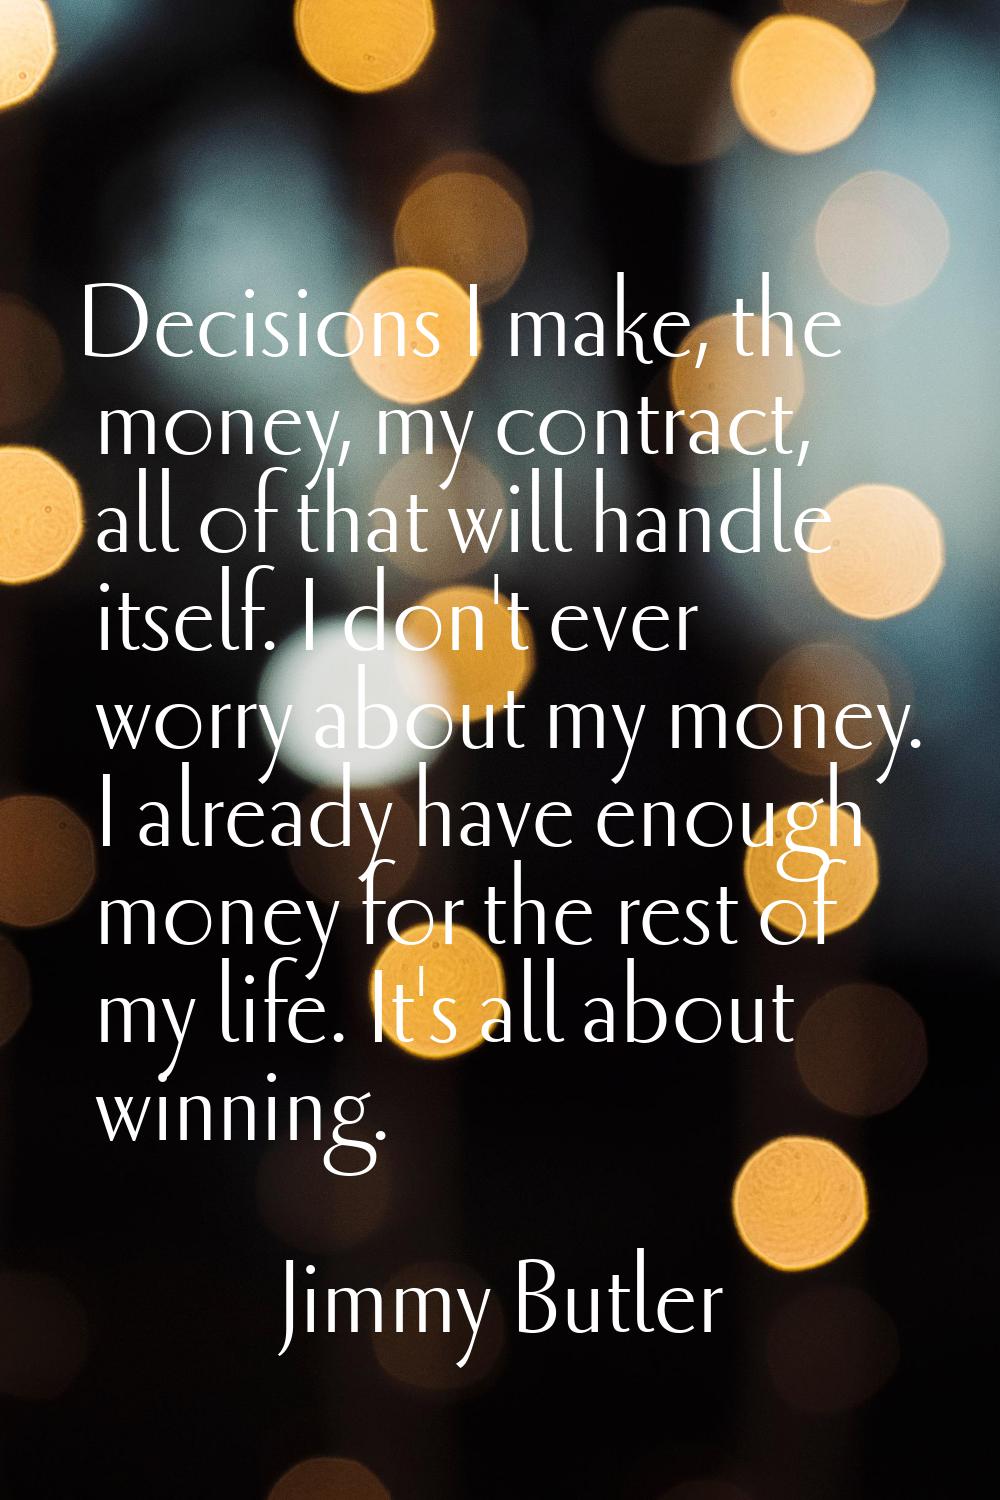 Decisions I make, the money, my contract, all of that will handle itself. I don't ever worry about 